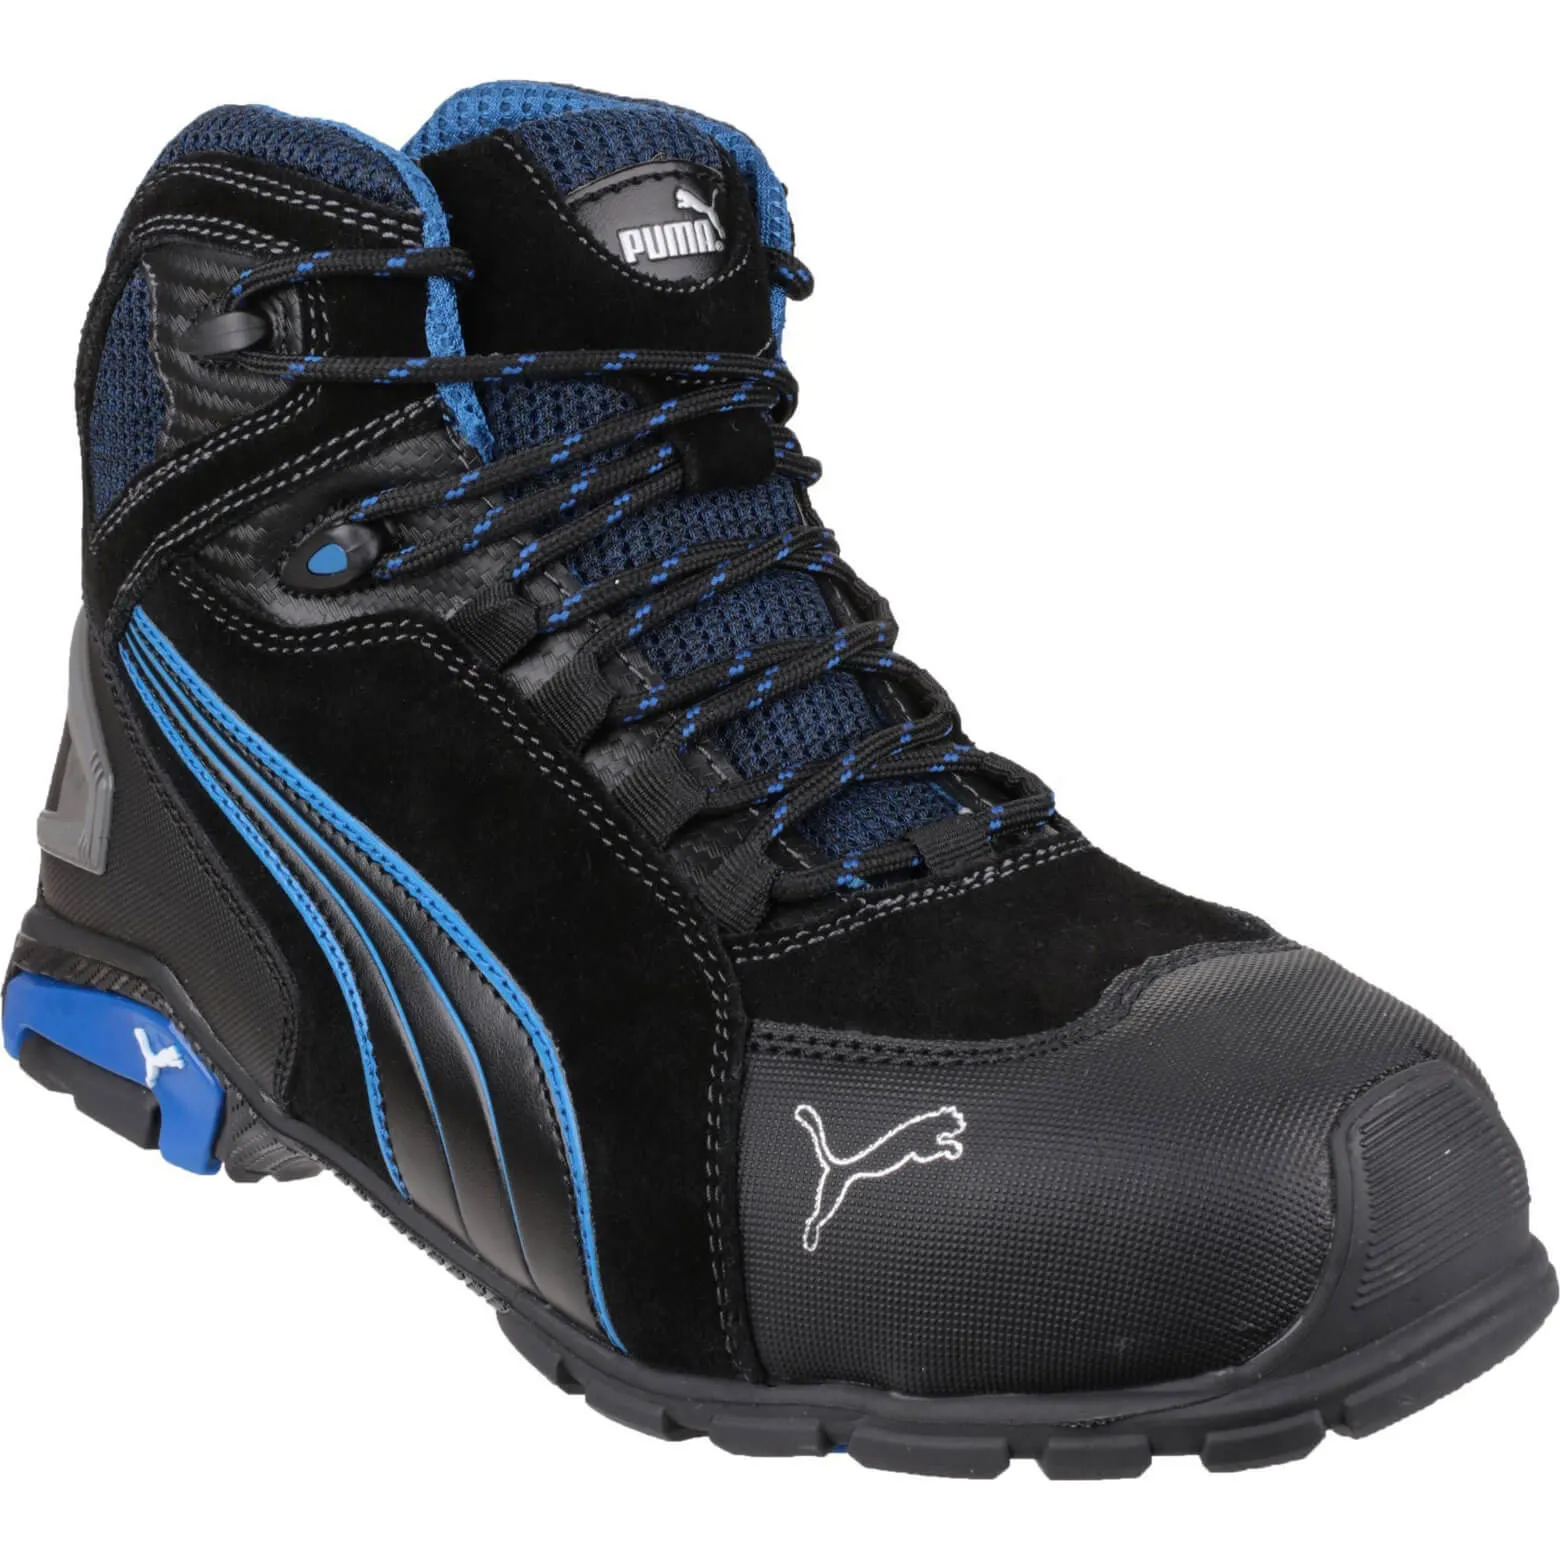 Puma Mens Safety Rio Mid Safety Boots - Black, Size 10